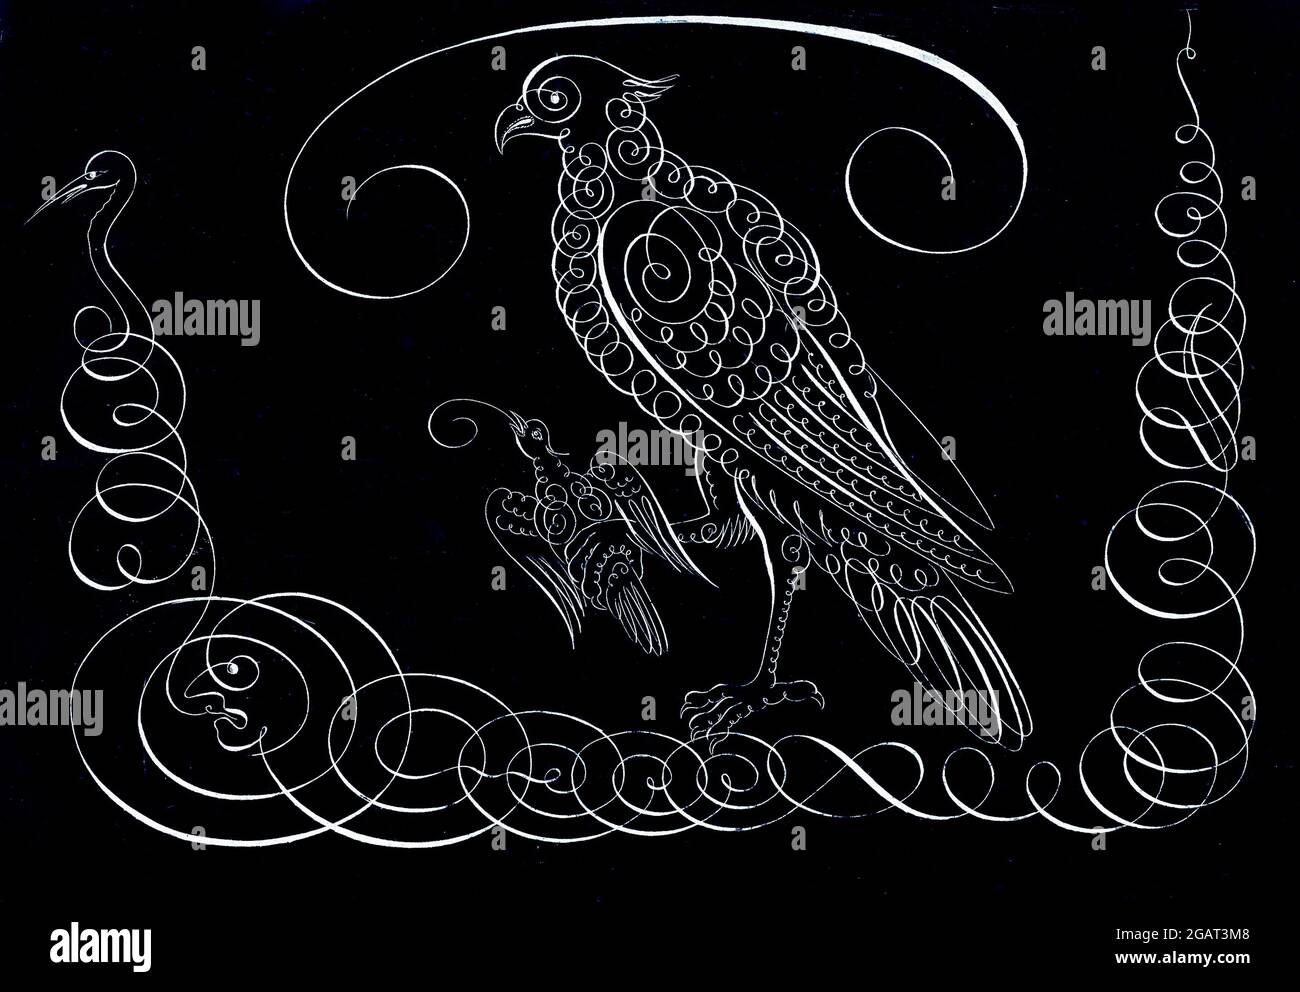 Vintage Ambrosius Perlingh animal calligraphy given a modern twist Stock Photo